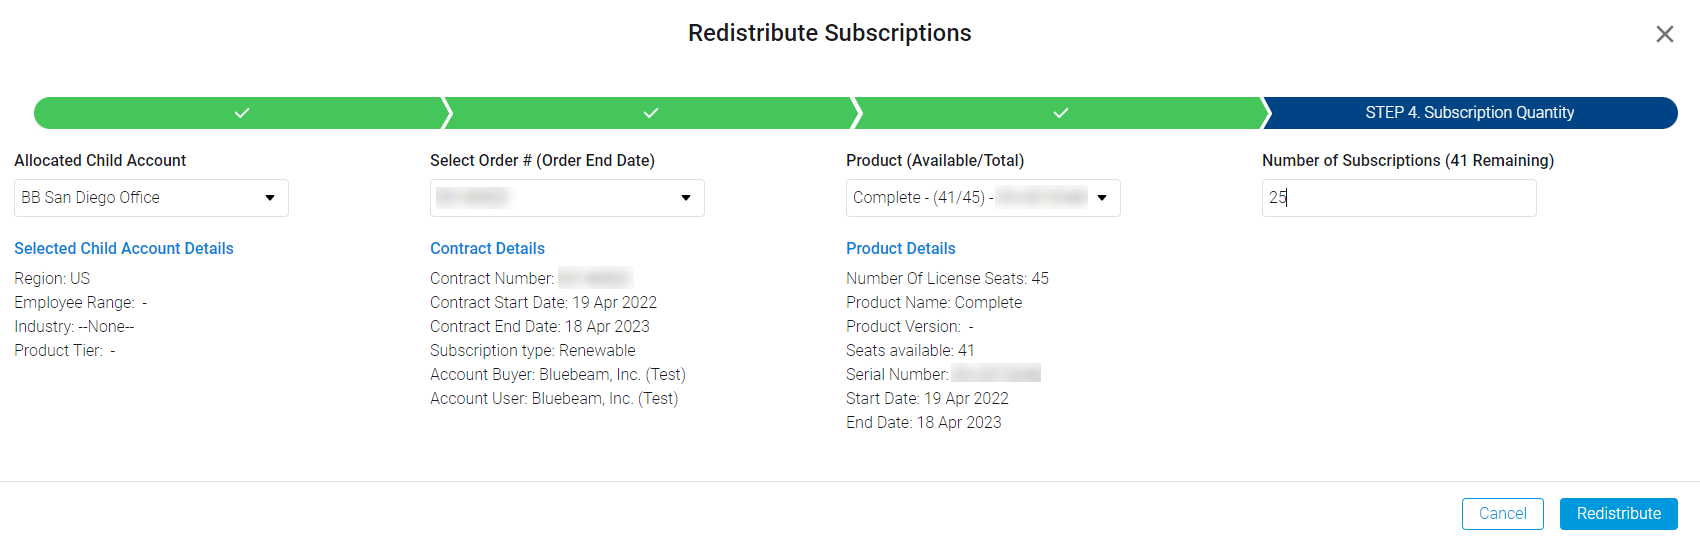 Subscription quantity for reallocation